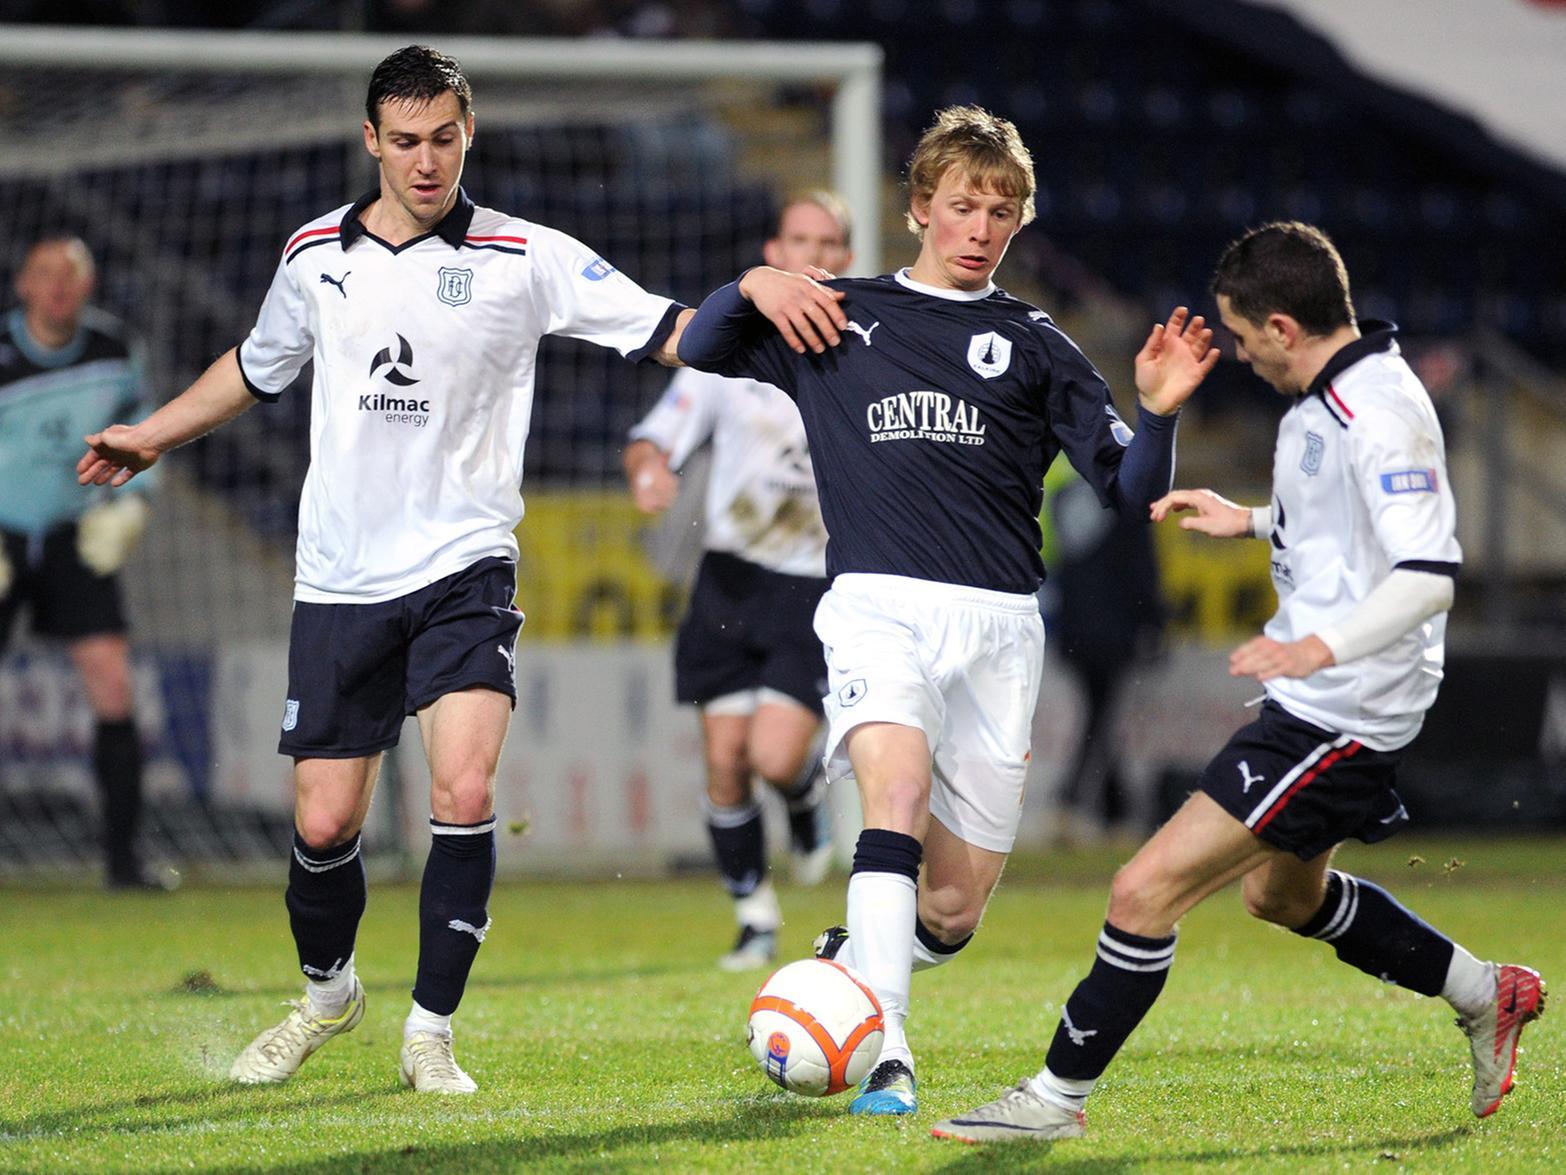 The son of former Bairns player Steve Fulton joined Swansea City on 'Deadline Day' in January 2014 and it still with the Welsh side after loan spells with Oldham Athletic and Wigan Athletic